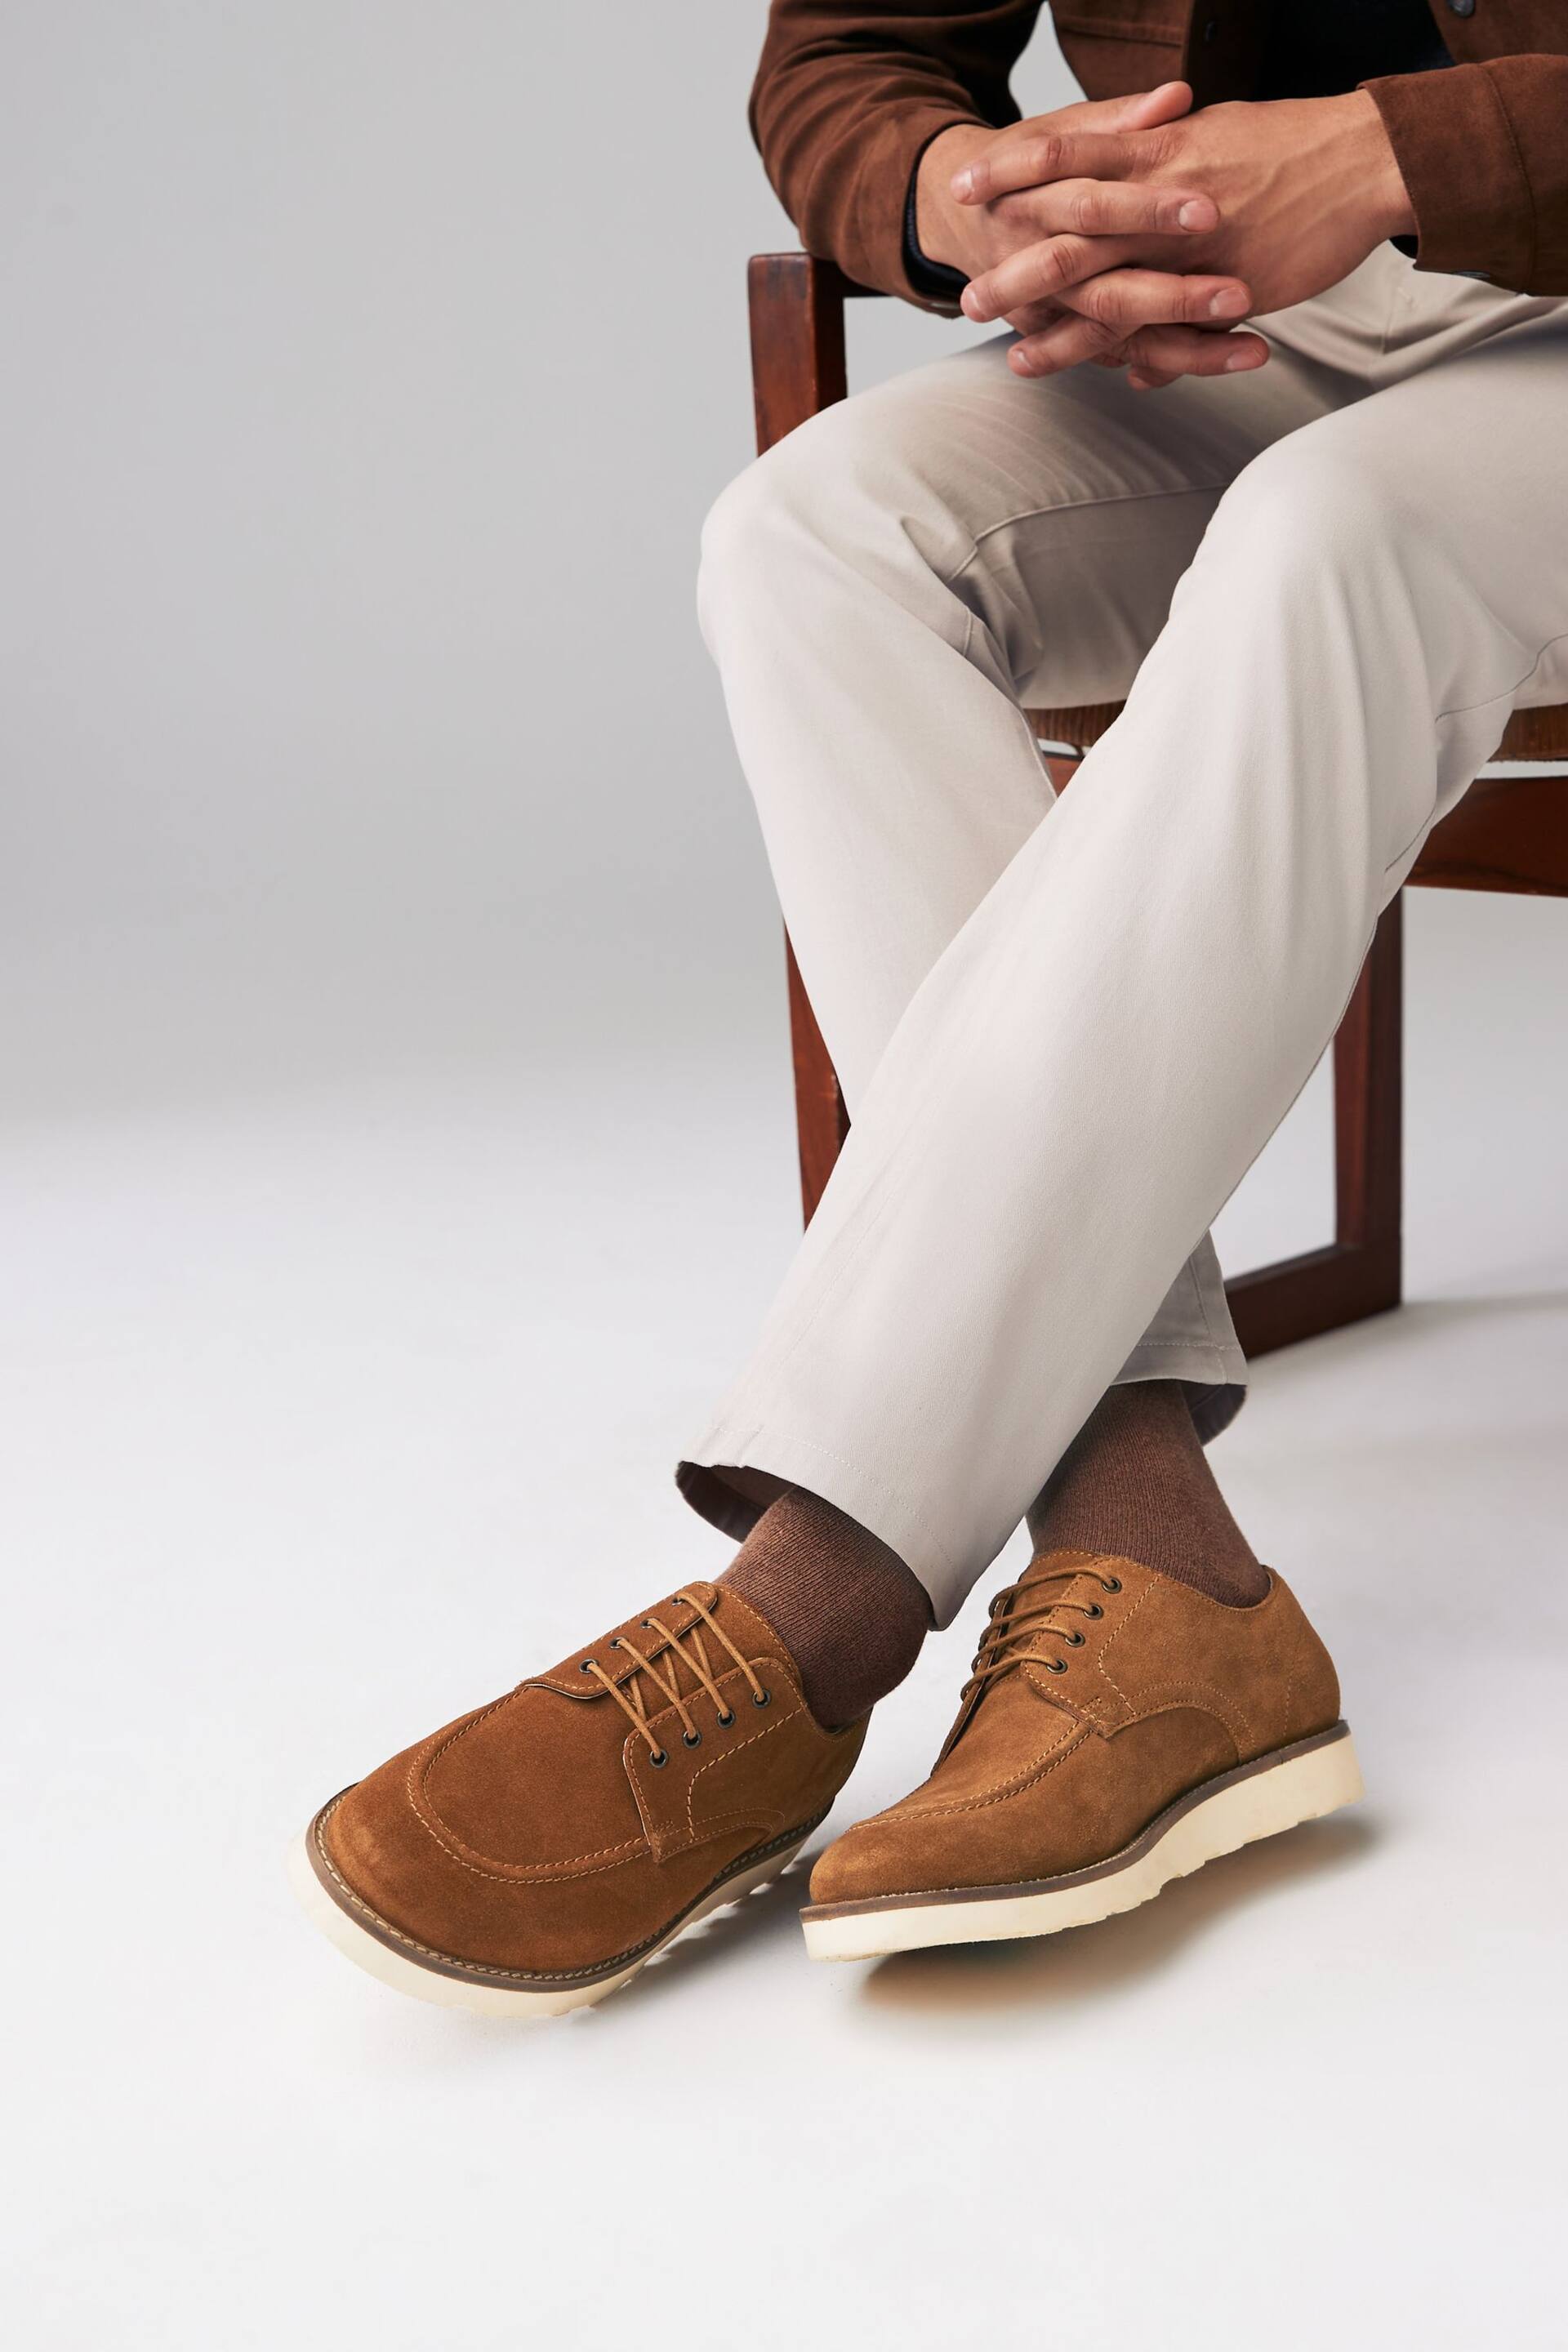 Tan Brown Suede Apron Wedge Shoes - Image 7 of 7